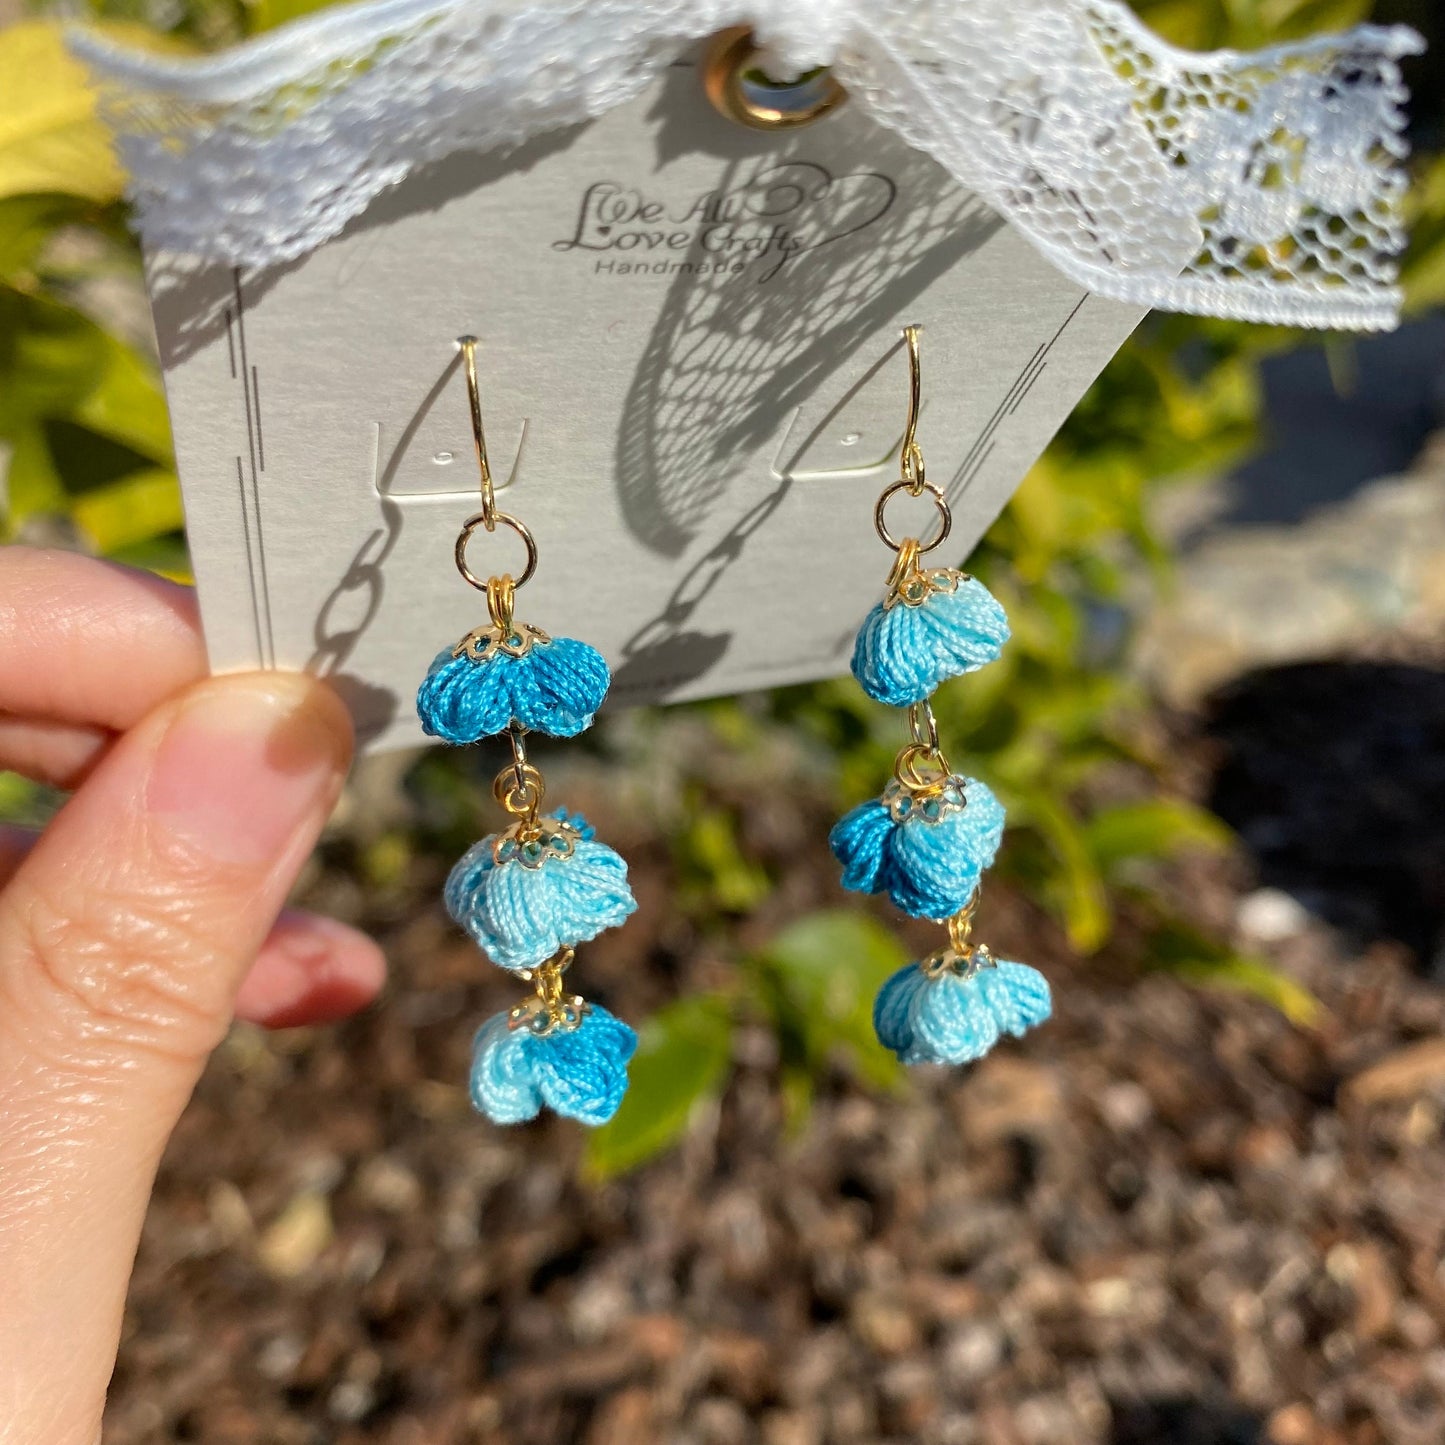 Load image into Gallery viewer, Light blue Ombre Puff flower Dangled earrings/Microcrochet/14k gold/Spring gift for her/Knitting handmade jewelry/Ship from US
